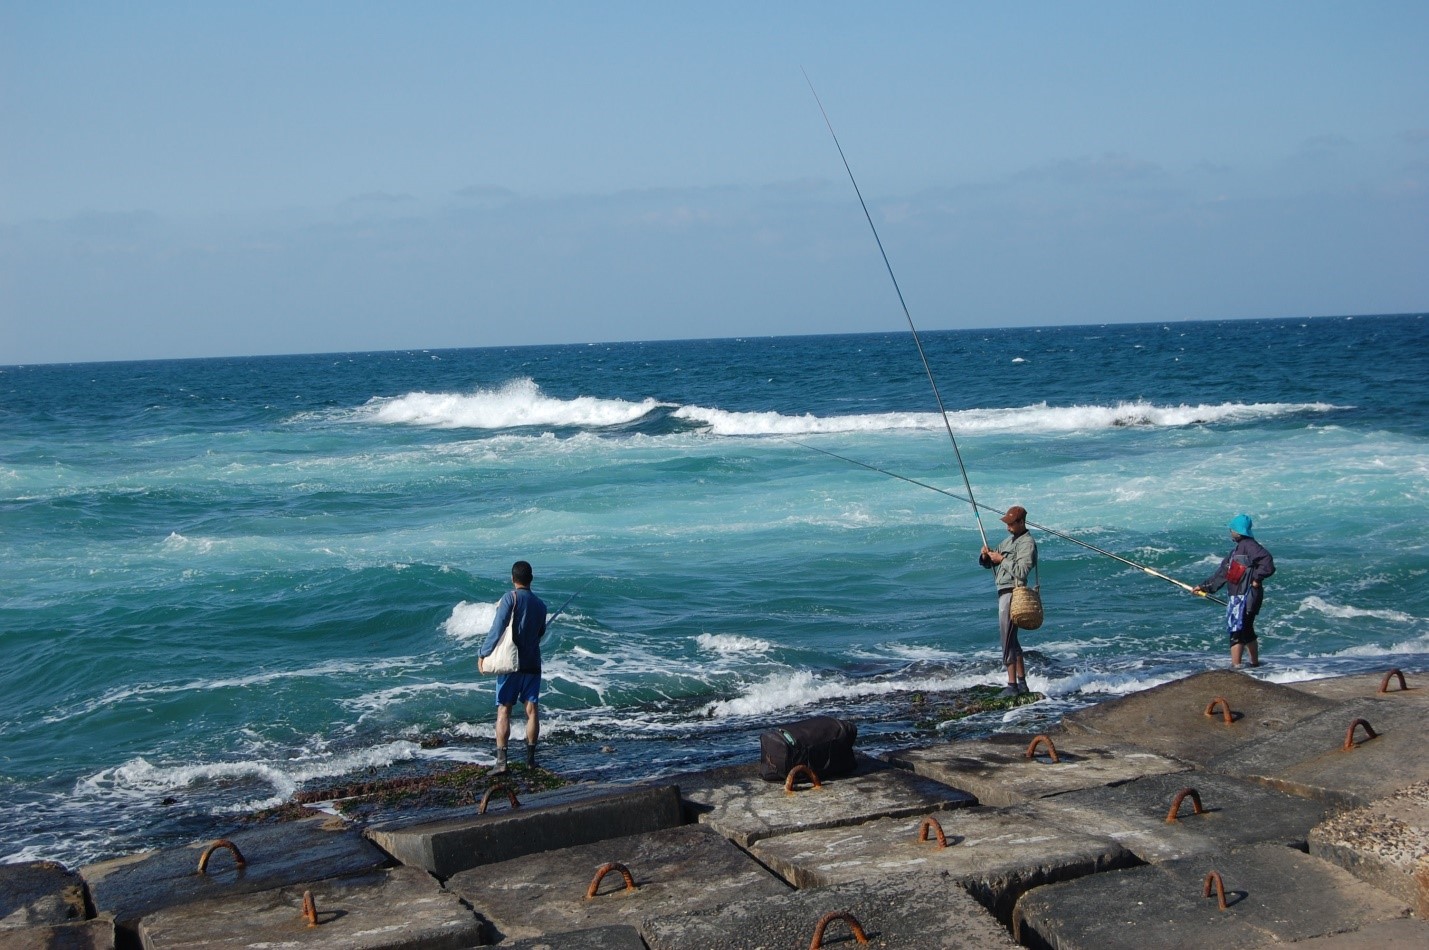 Some of the Best Fishing Spots in the World